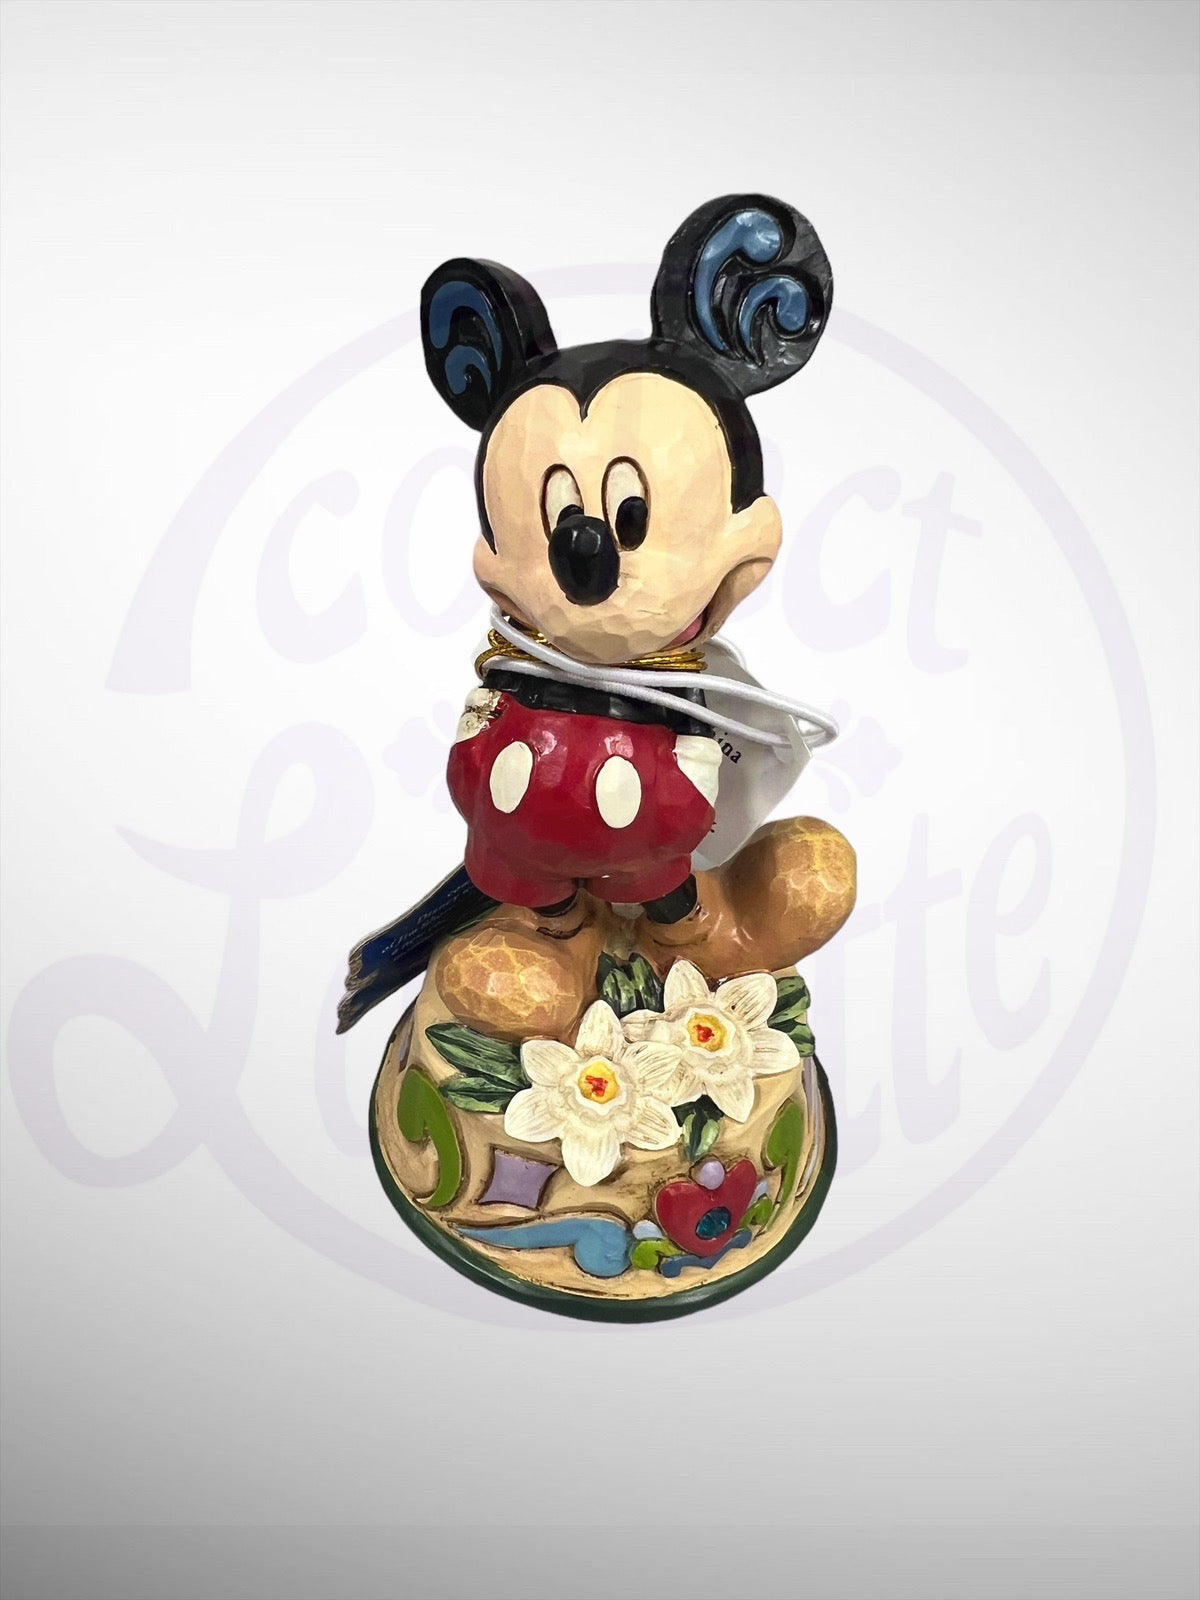 Jim Shore Disney Traditions - December Mickey Mouse Figurine